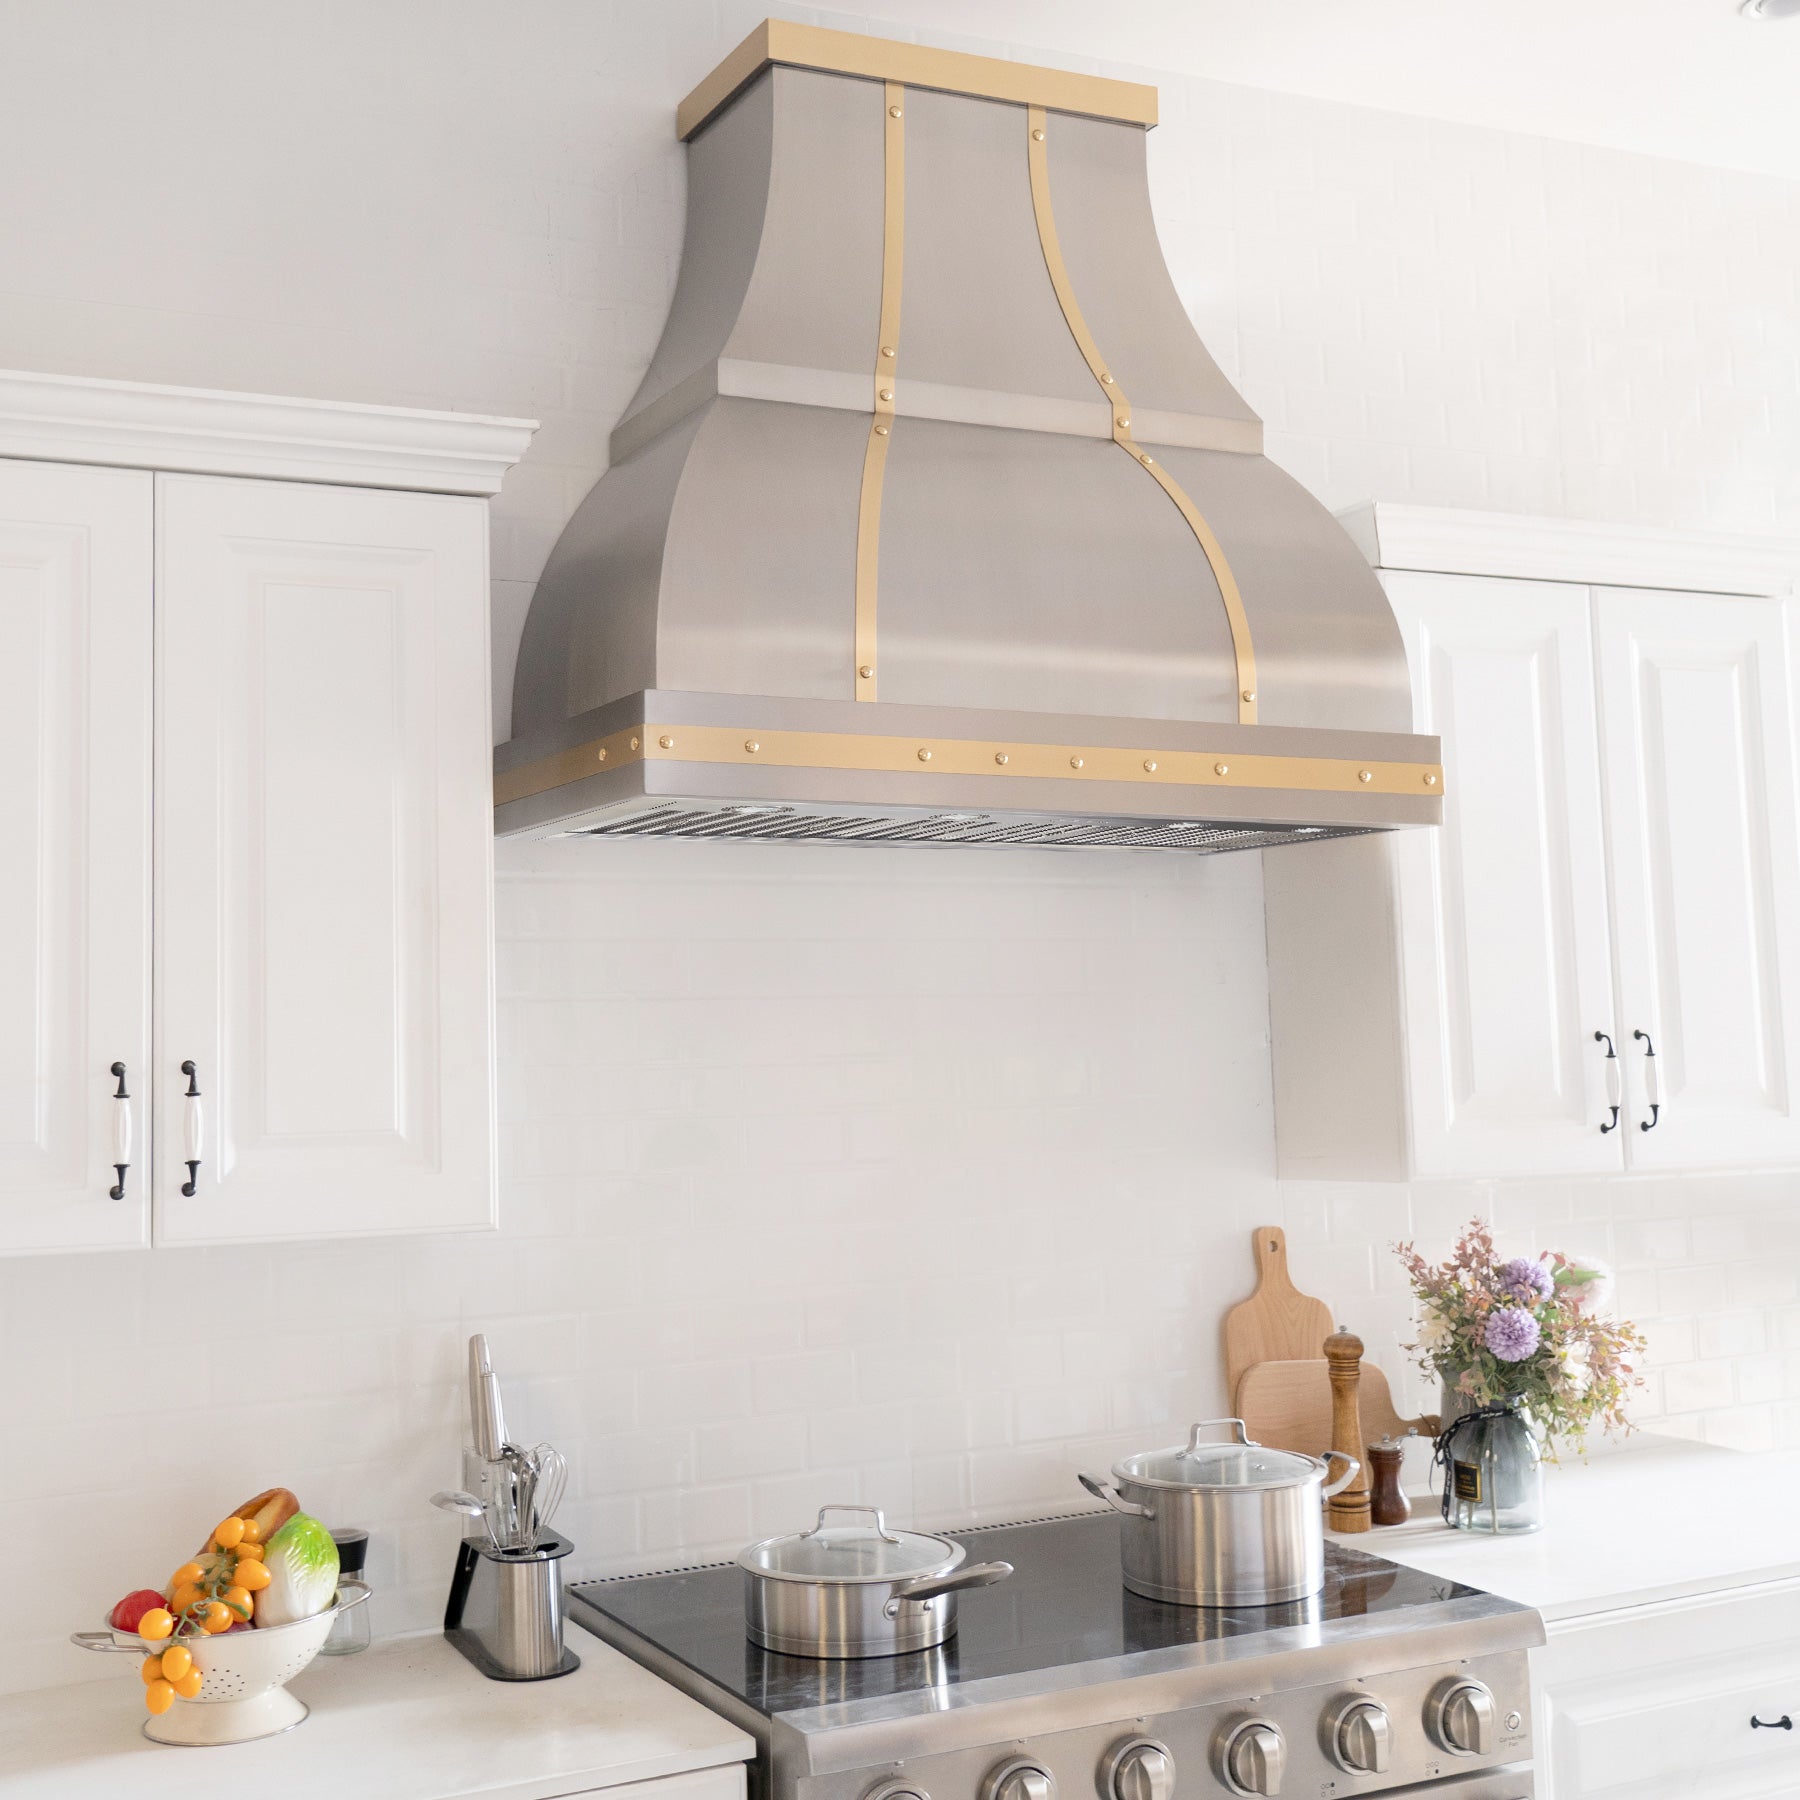 Fobest custom handmade brushed stainless steel range hood with brass straps and rivets installed in the white kitchen